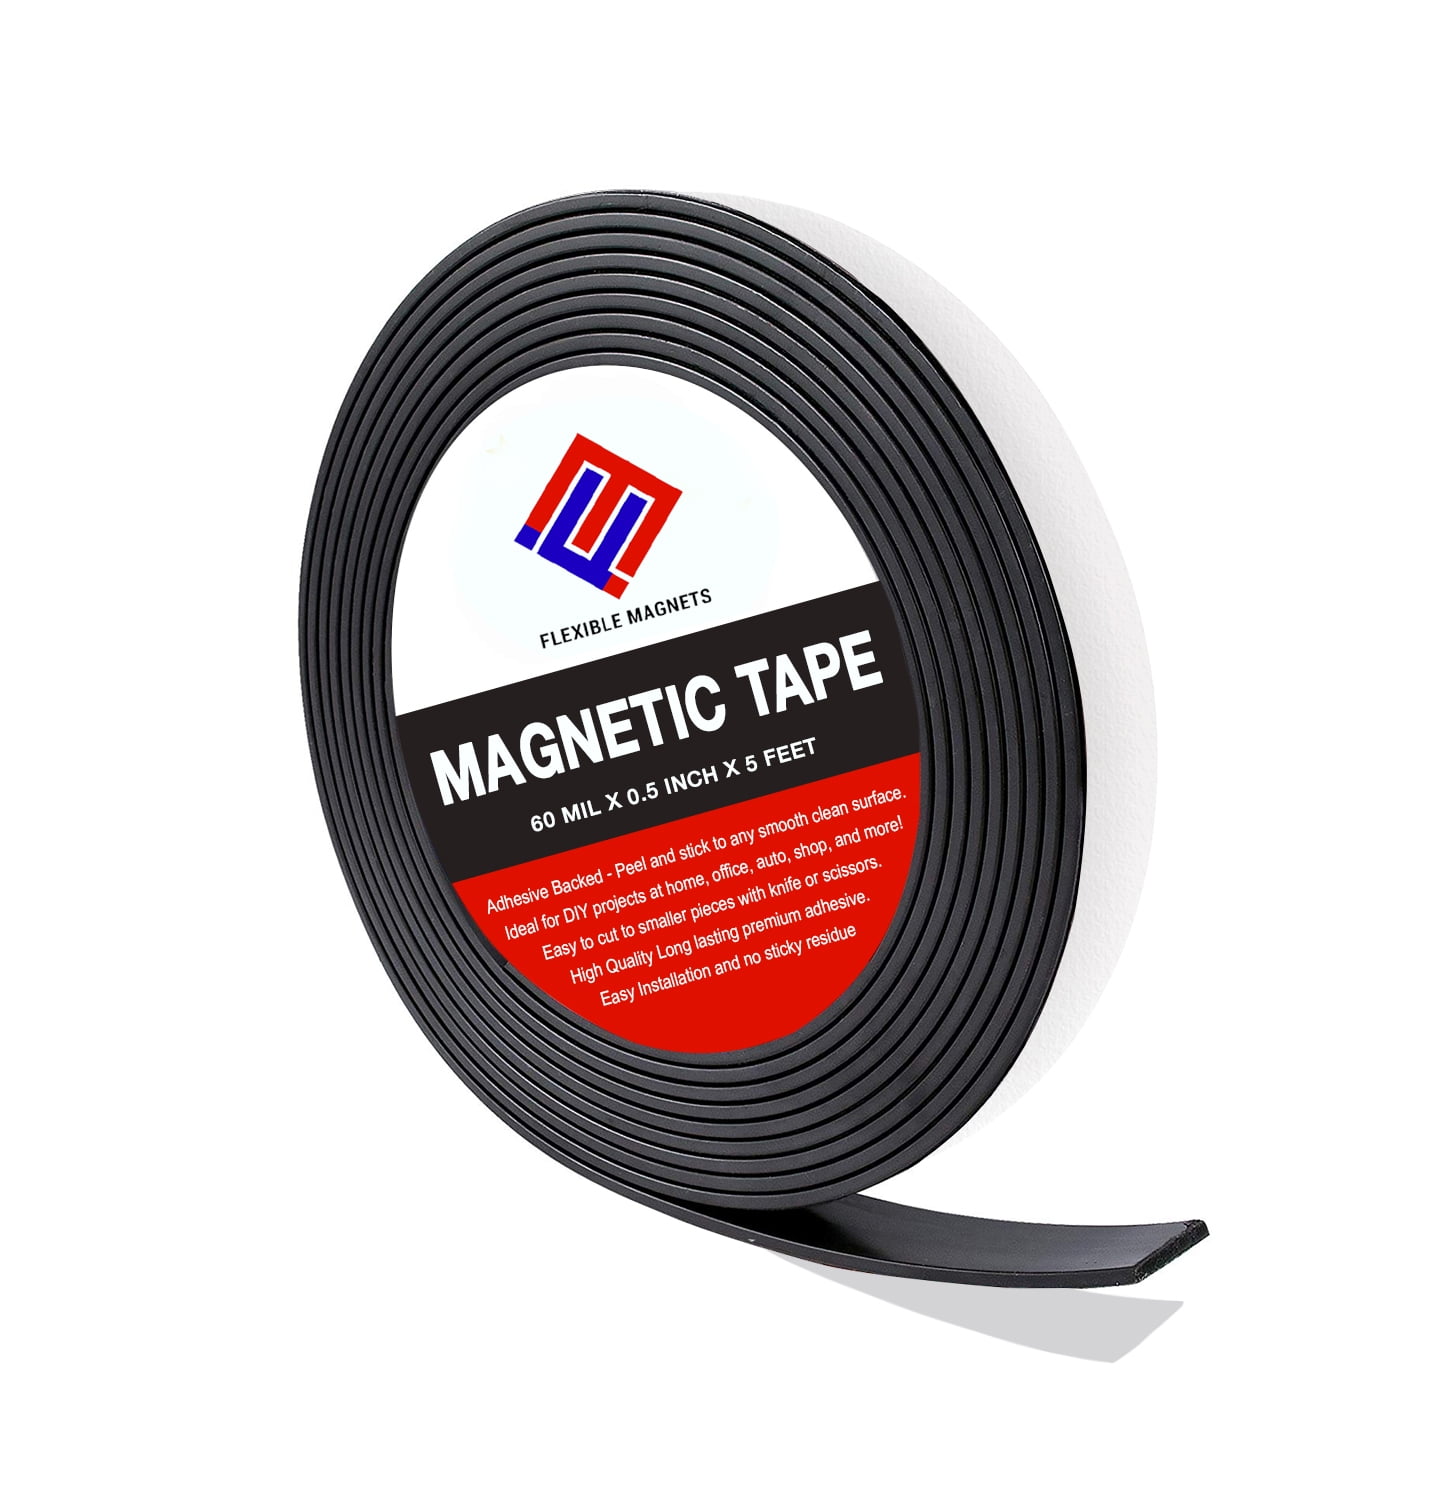 Magnetic Strip Tape 15Ft Flexible Roll ADHESIVE Backed Magnet Strong Sticky Back 